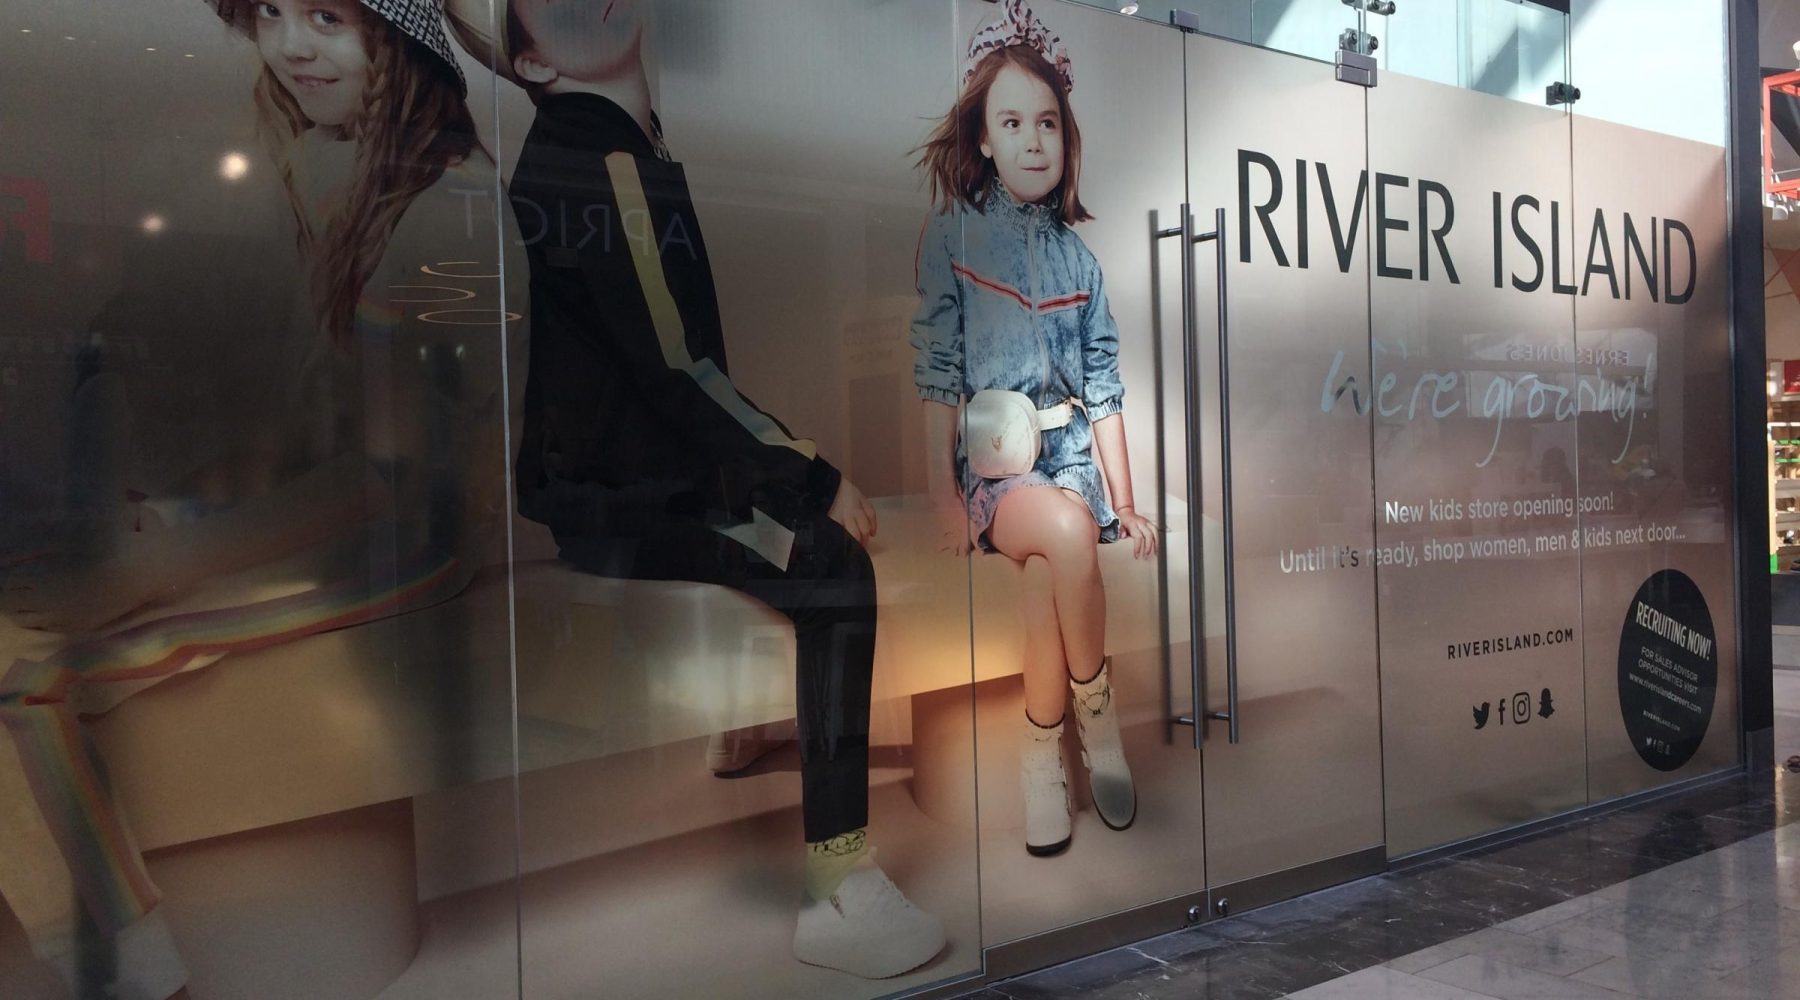 River Island boss – Bradford offered 'great opportunity'…